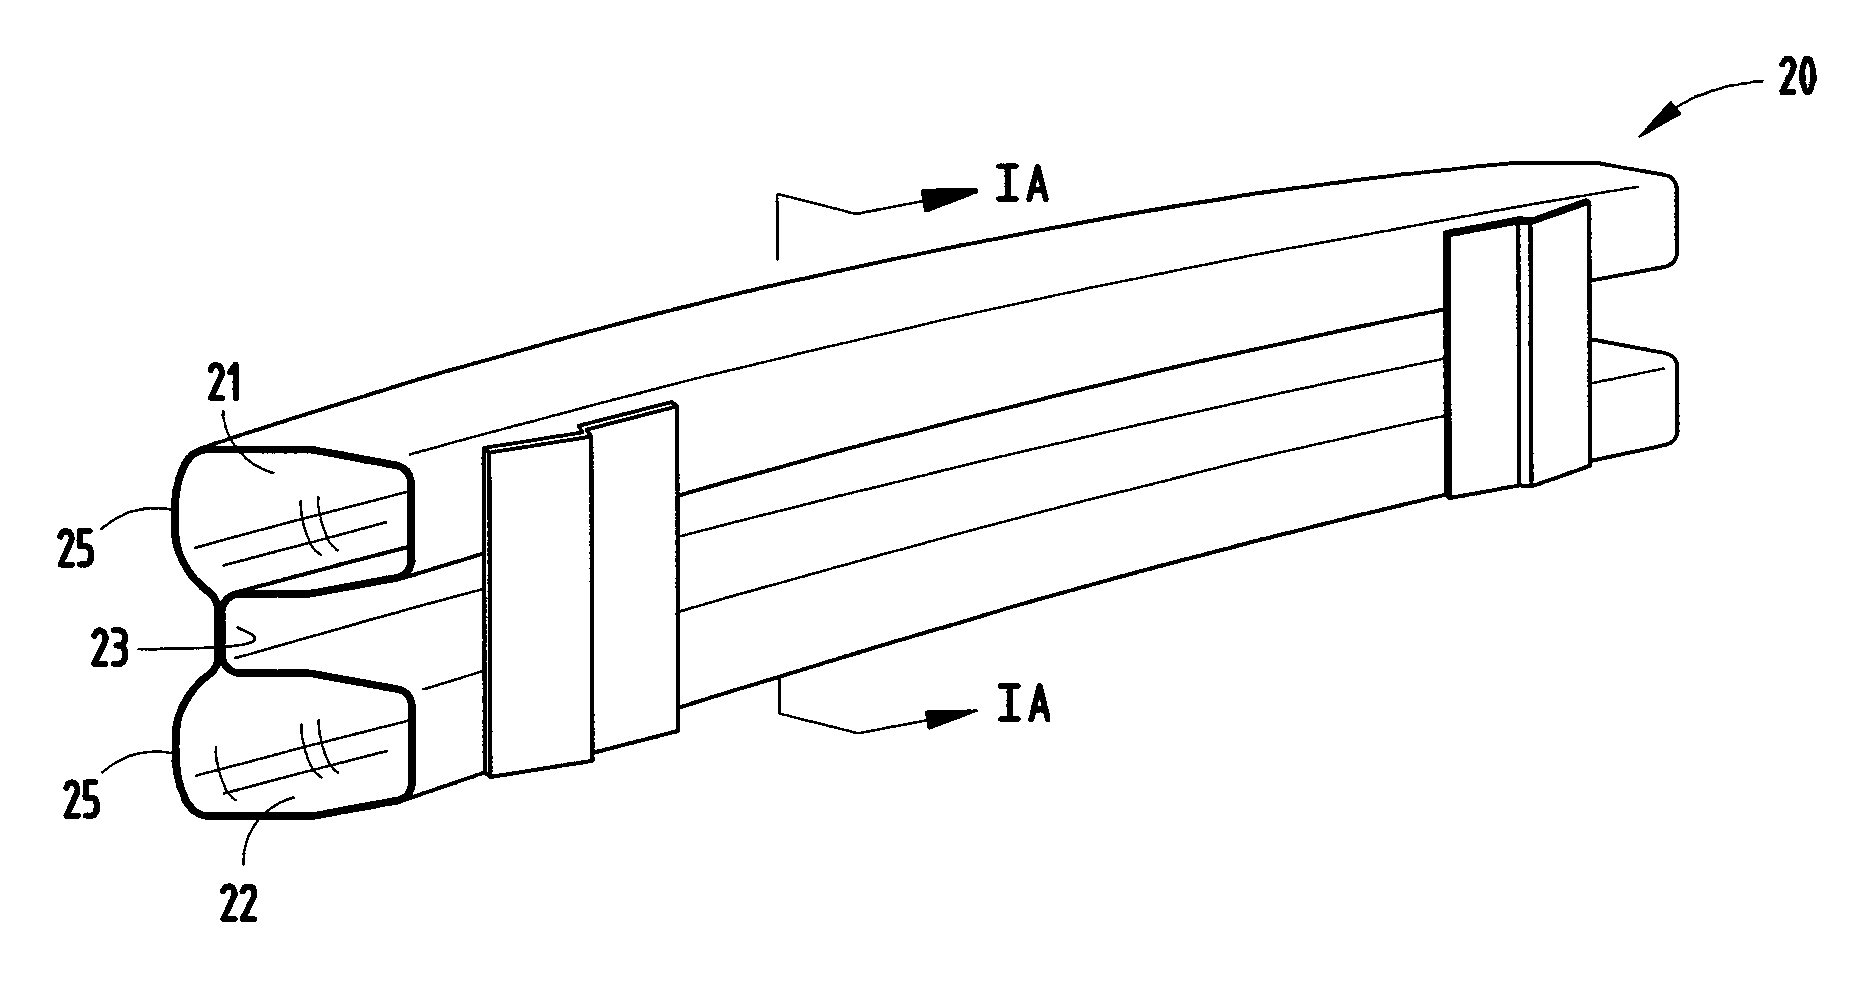 B-shaped beam with radiused face but recessed center